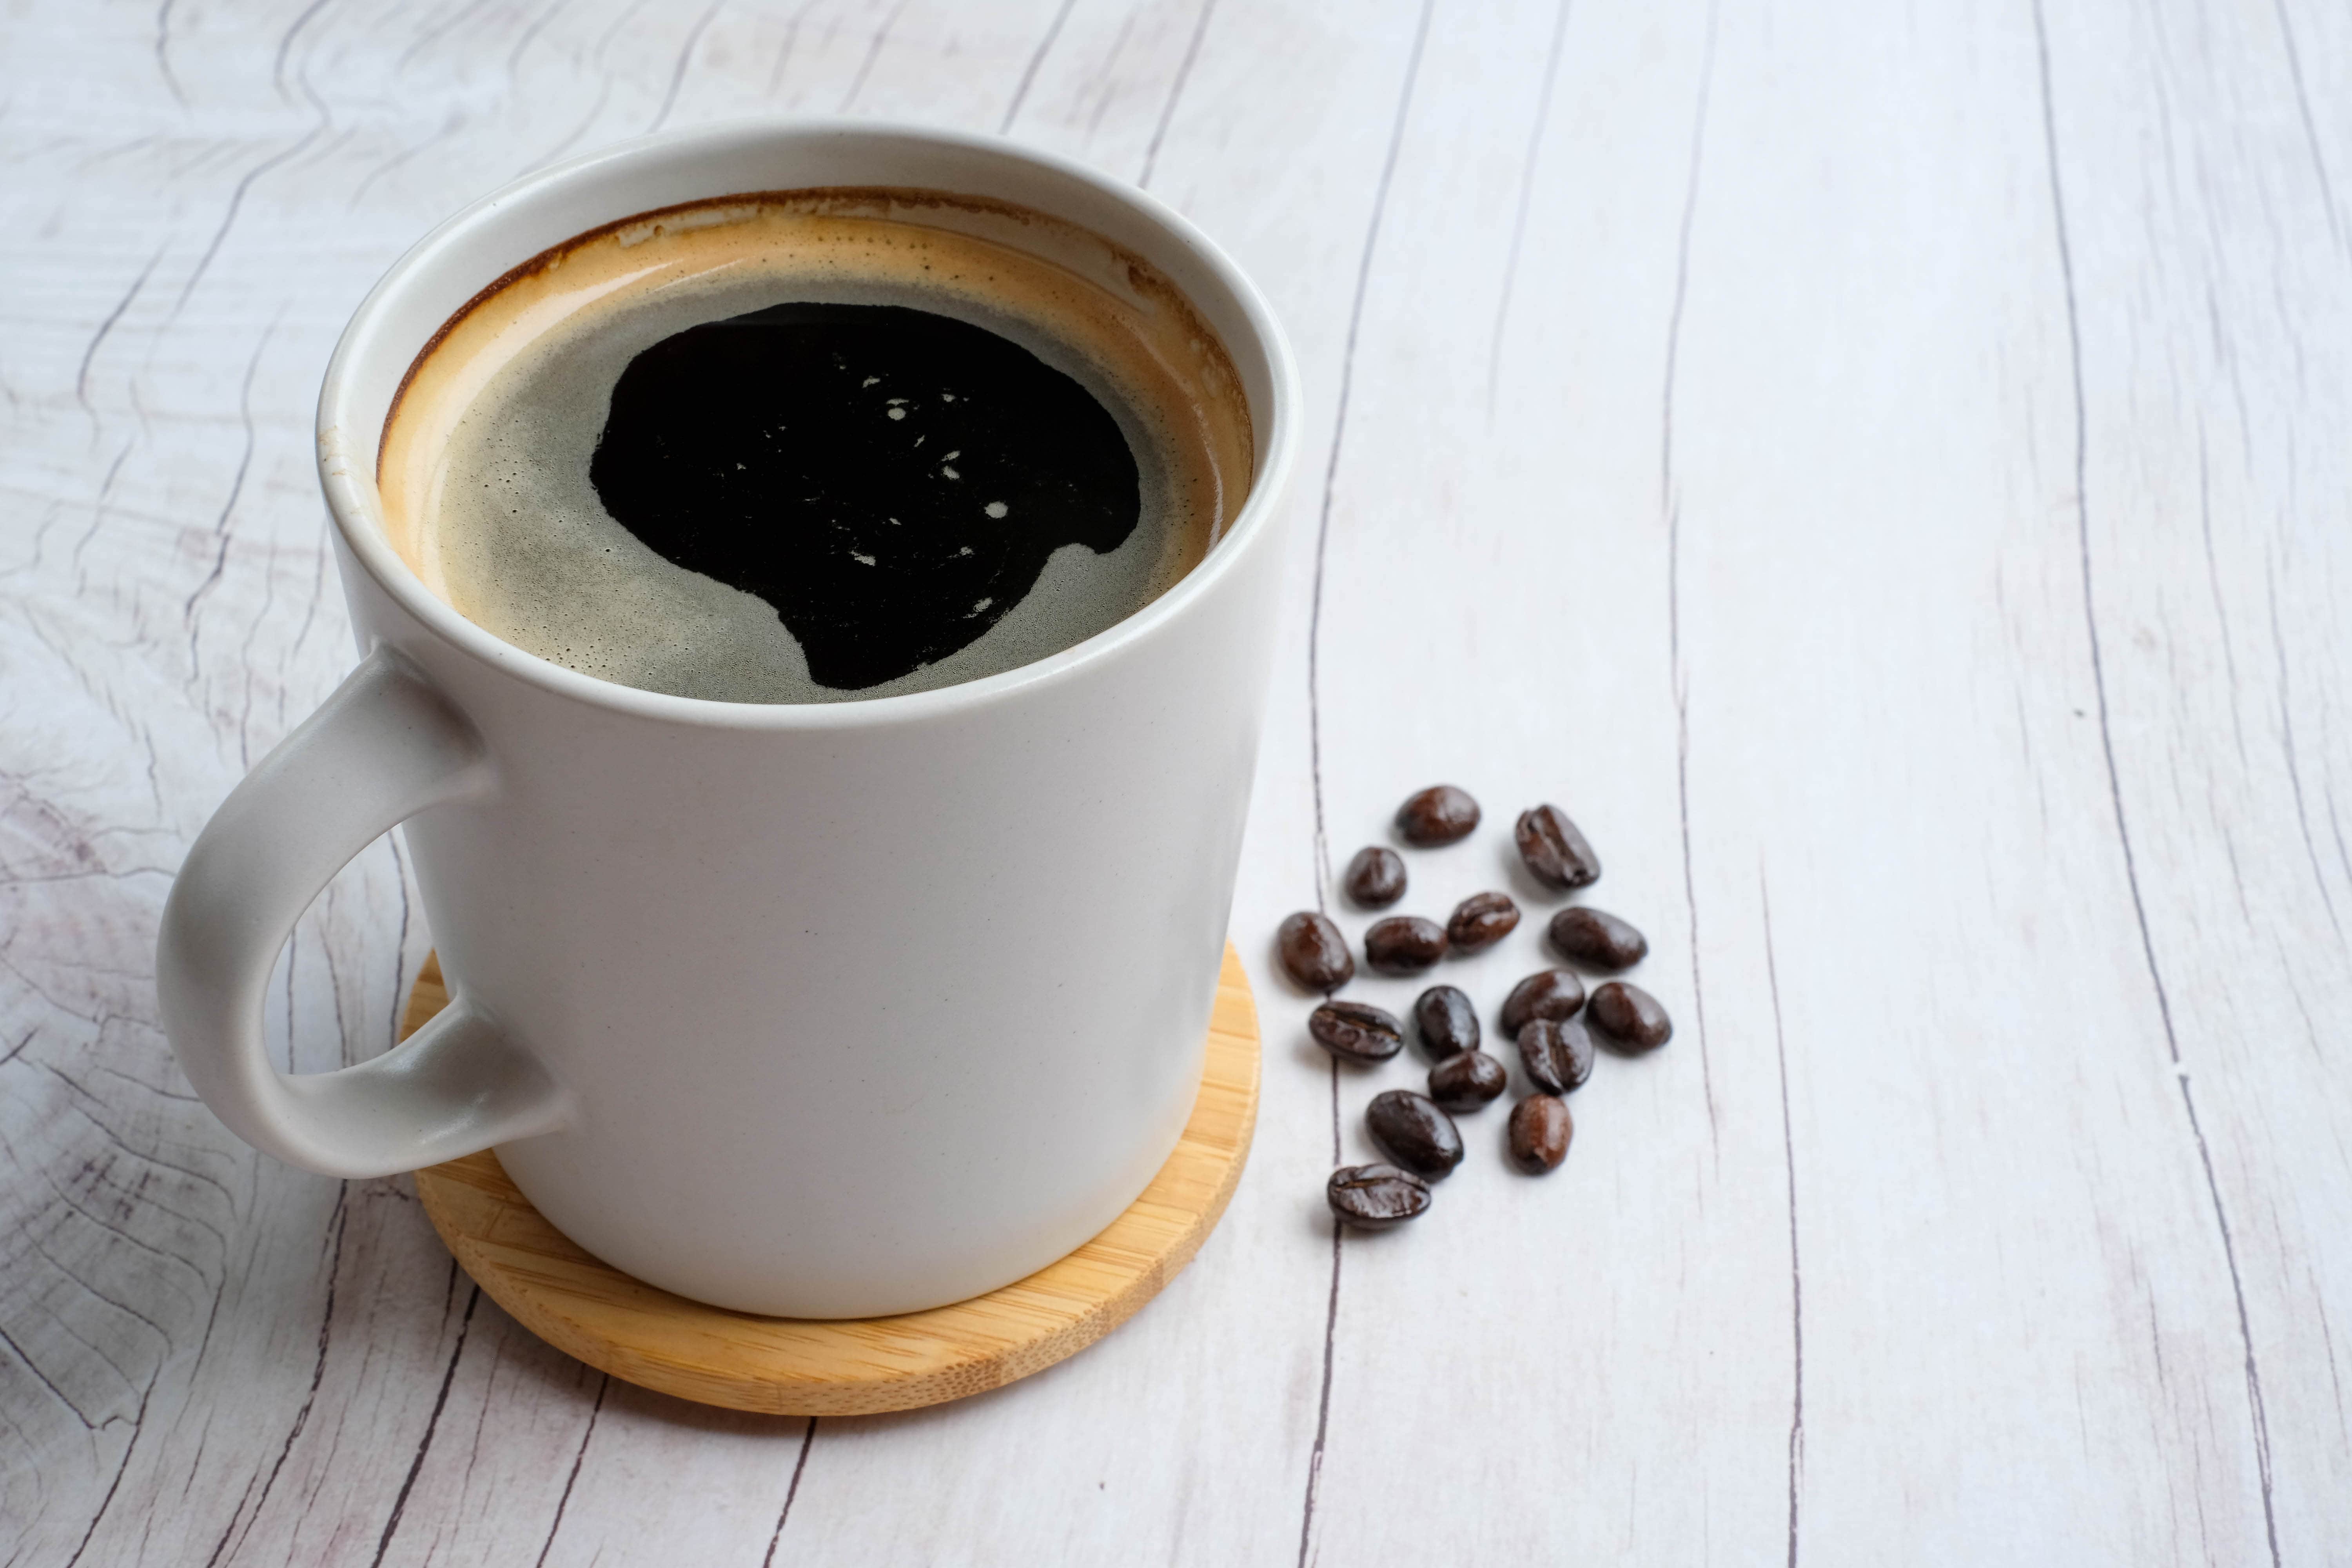 americano black coffee in a white mug on a wooden coaster with loose coffee beans on the side